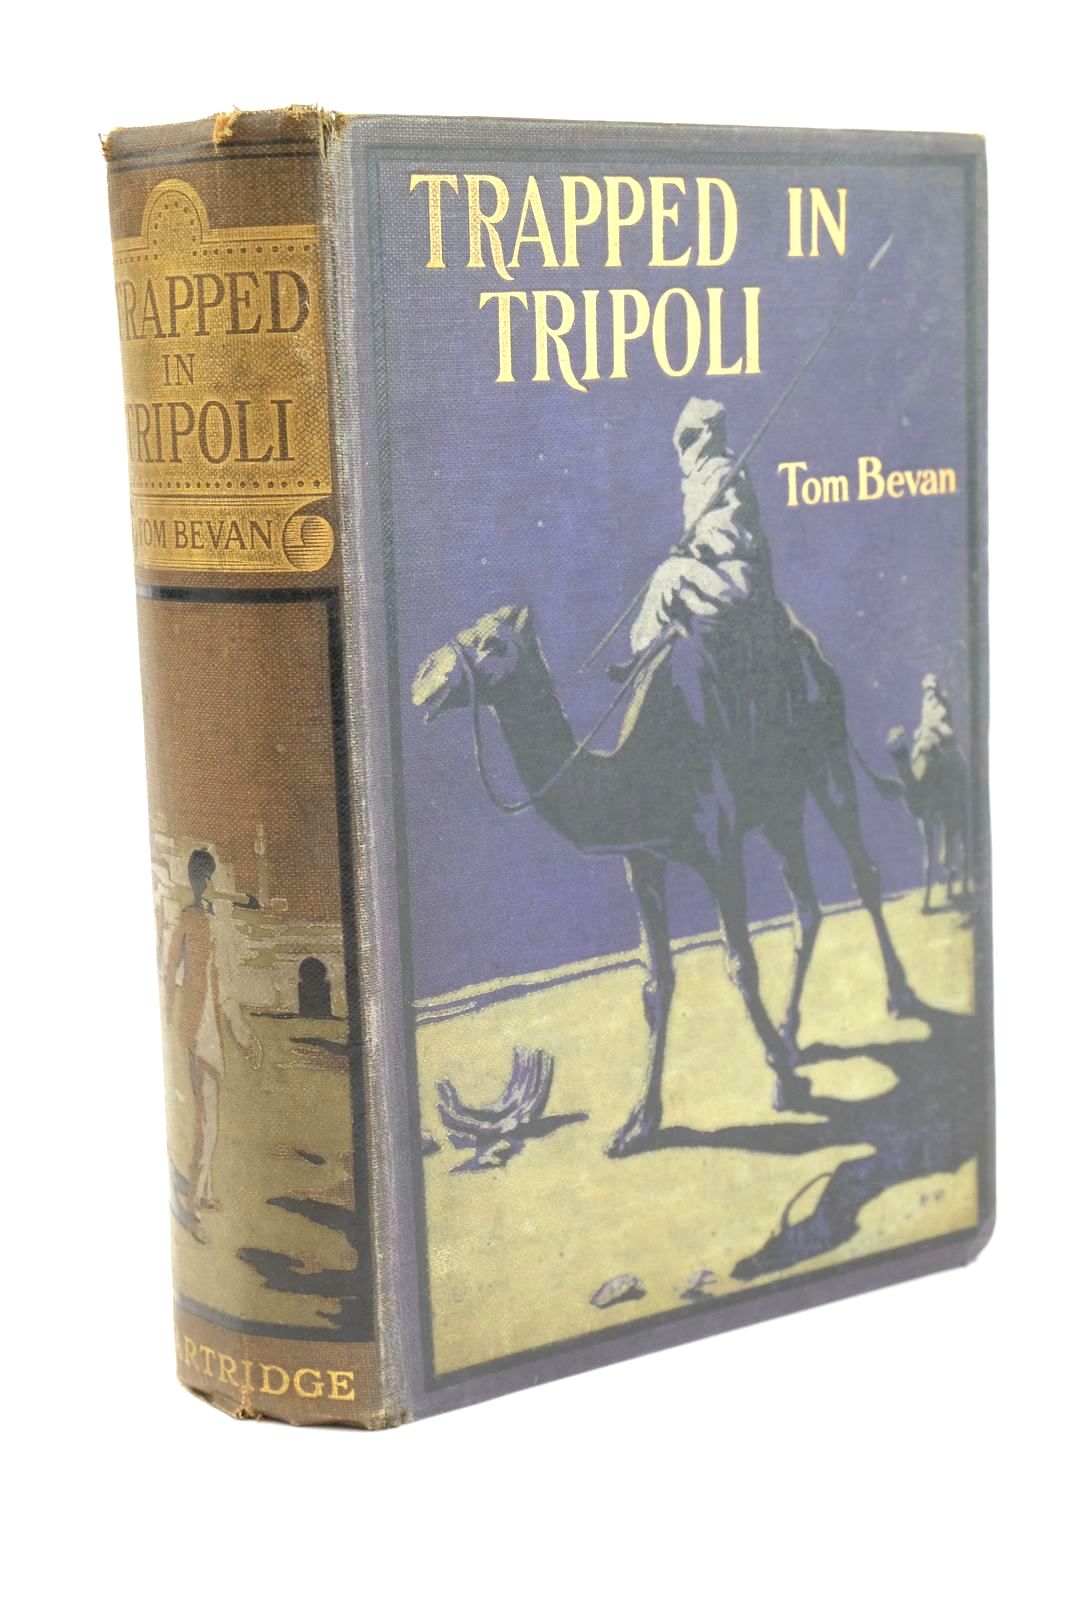 Photo of TRAPPED IN TRIPOLI written by Bevan, Tom illustrated by Daviel, L. published by S.W. Partridge &amp; Co. Ltd. (STOCK CODE: 1324592)  for sale by Stella & Rose's Books